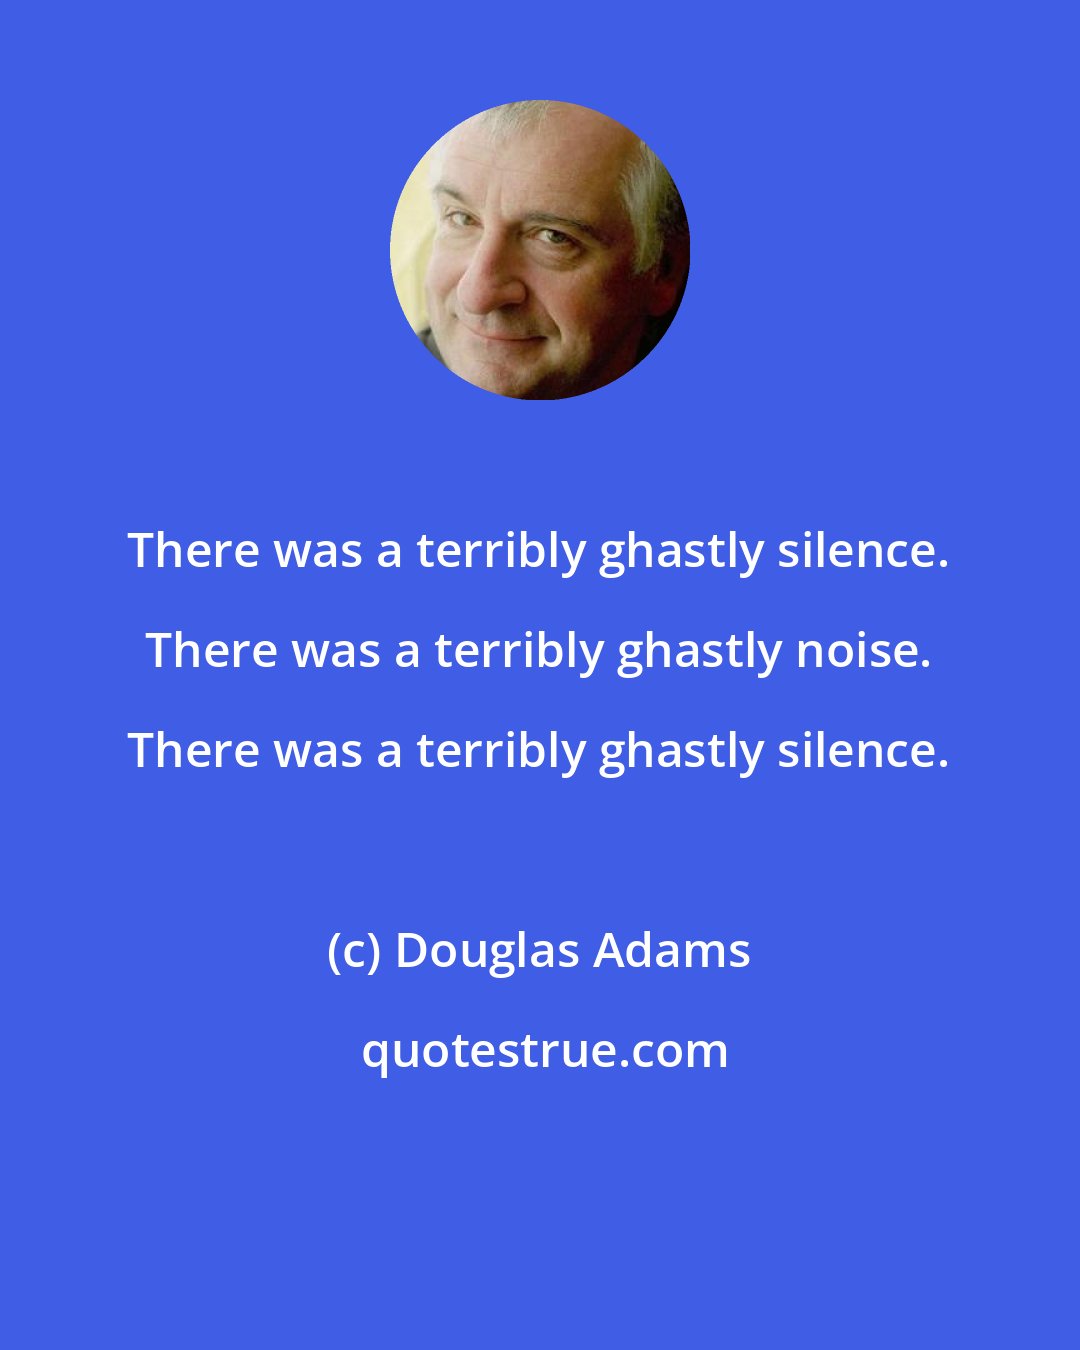 Douglas Adams: There was a terribly ghastly silence. There was a terribly ghastly noise. There was a terribly ghastly silence.